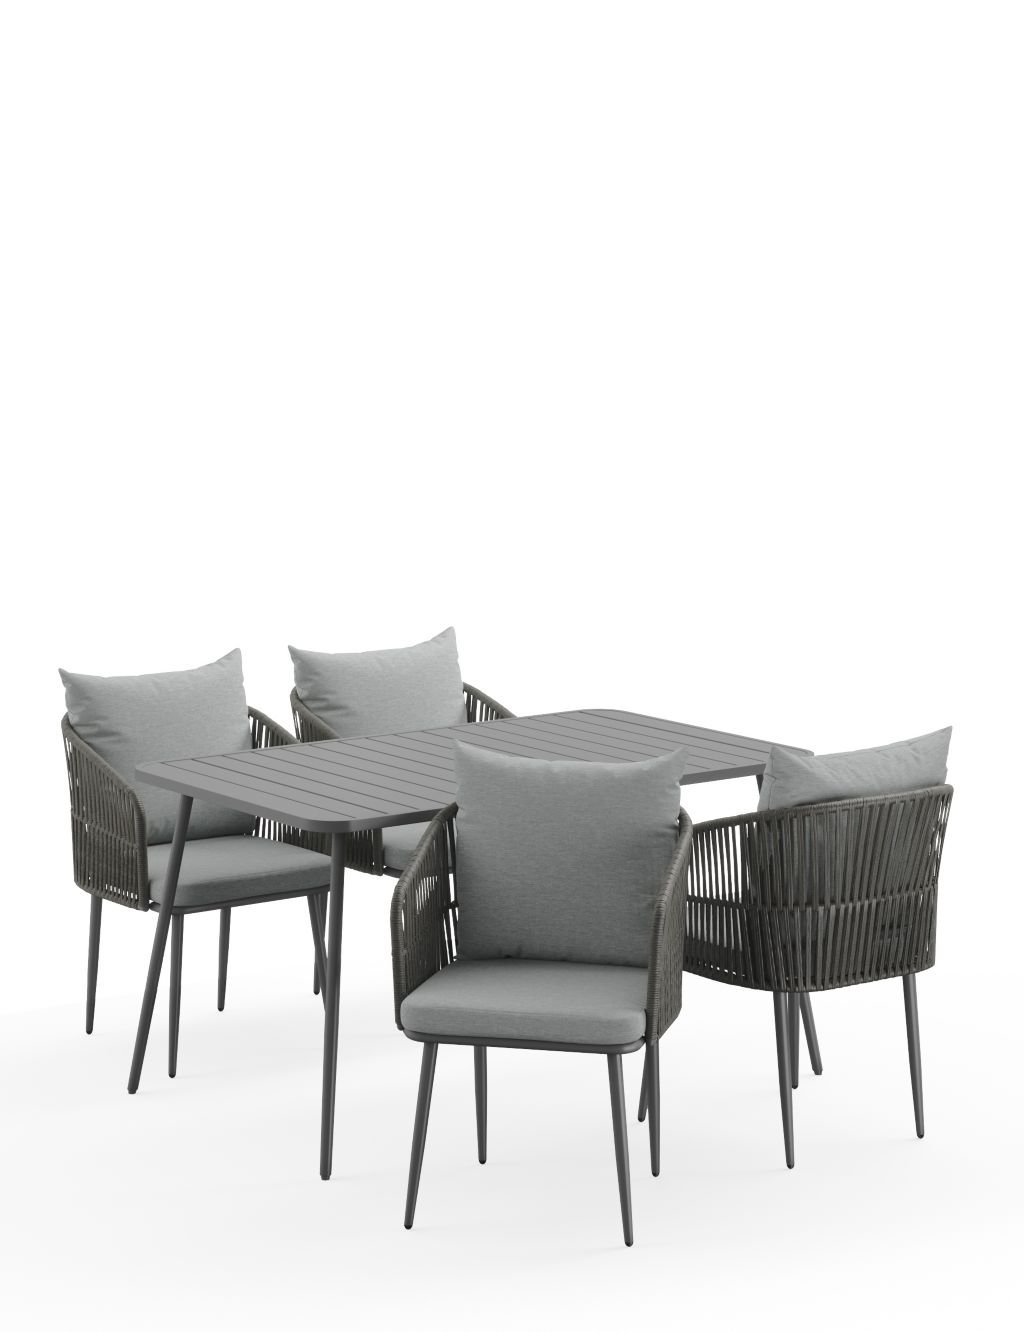 Melbourne 4 Seater Garden Table & Chairs